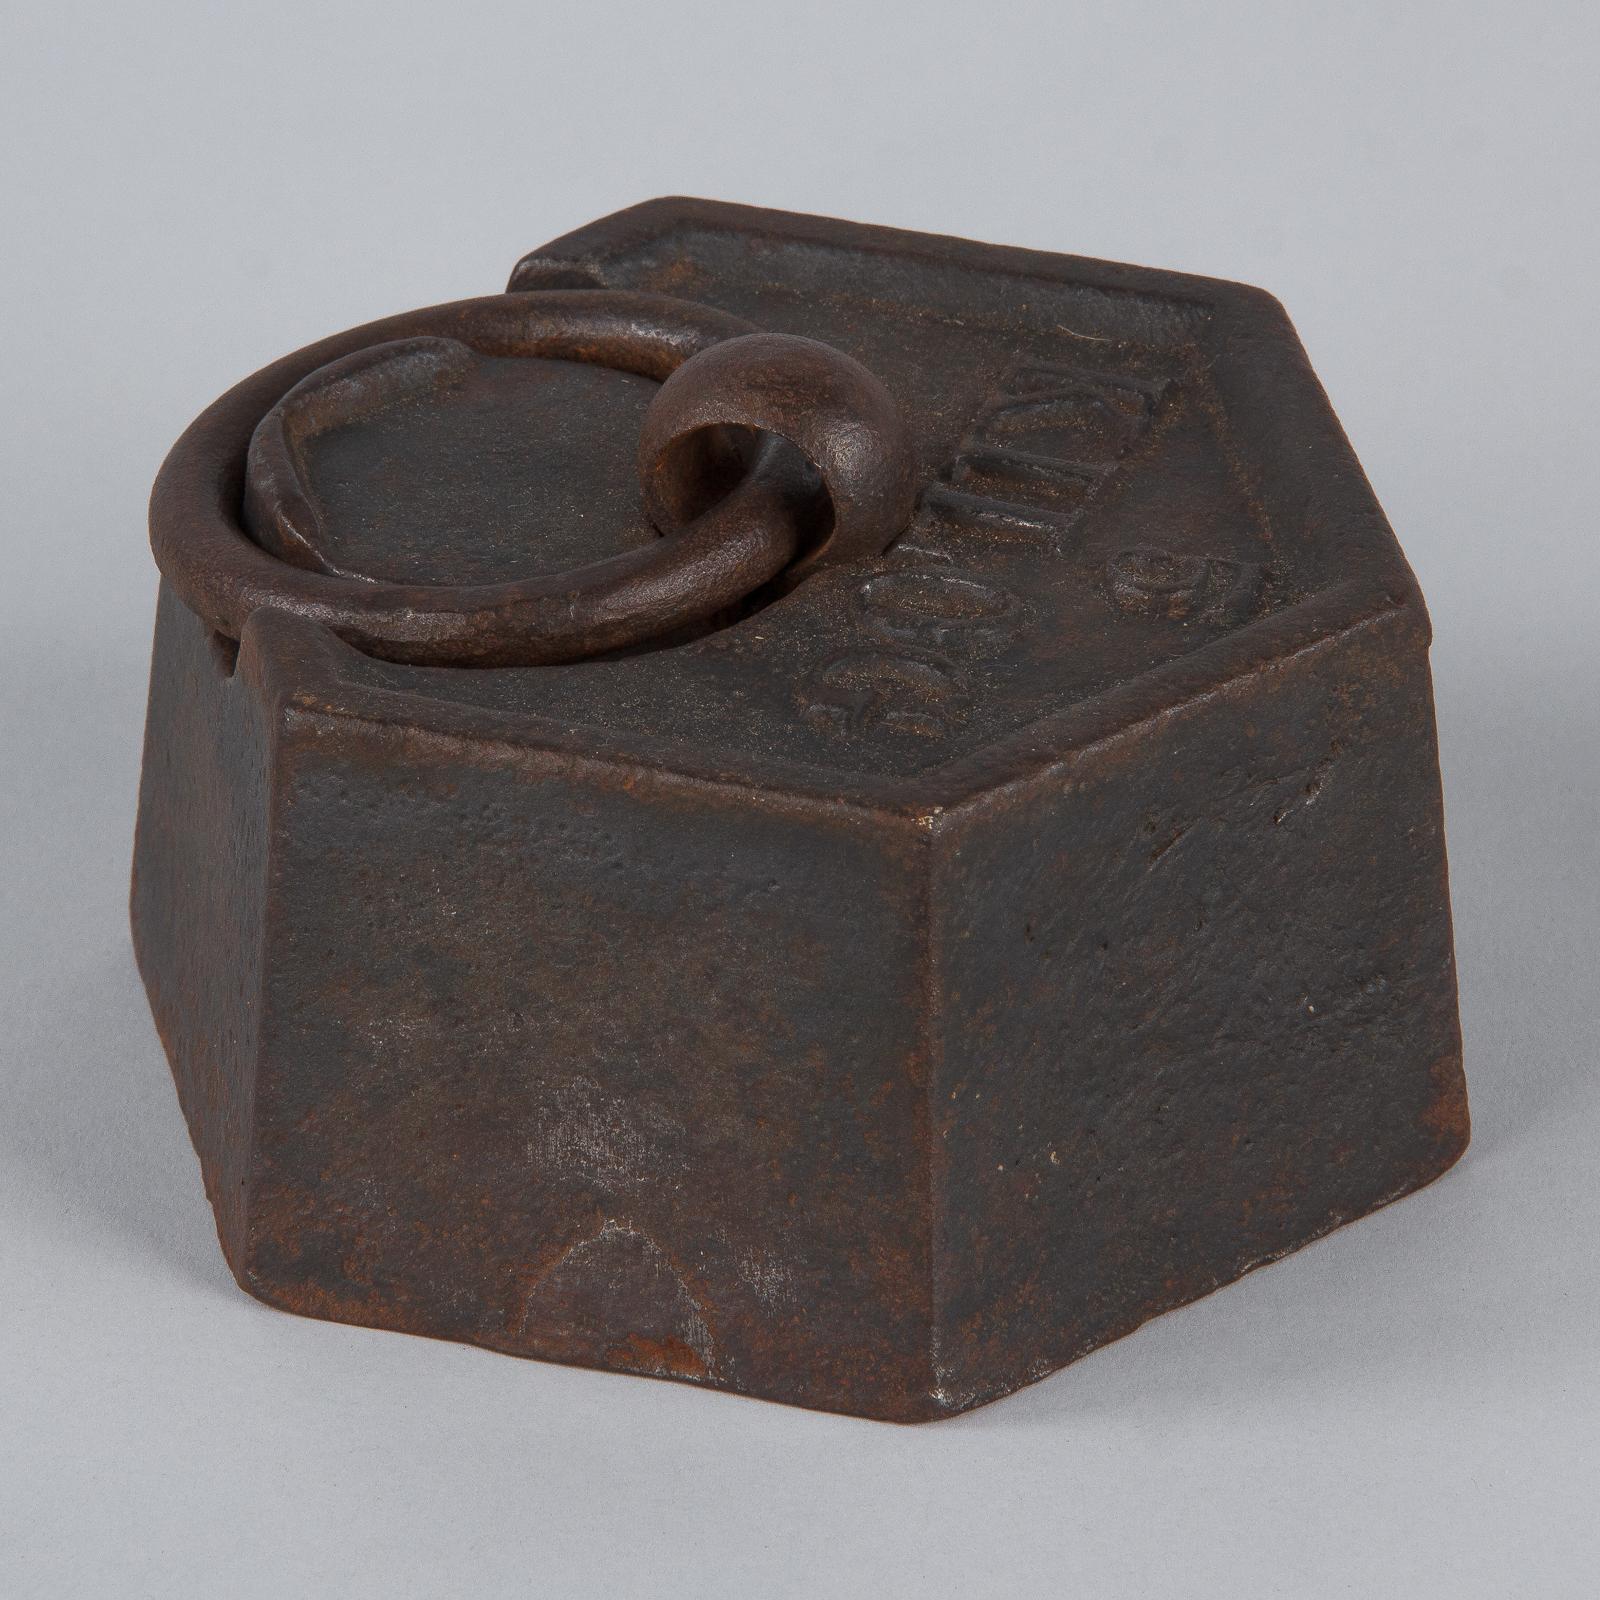 20th Century Five Kilogram Iron Scale Weight, France, Early 1900s